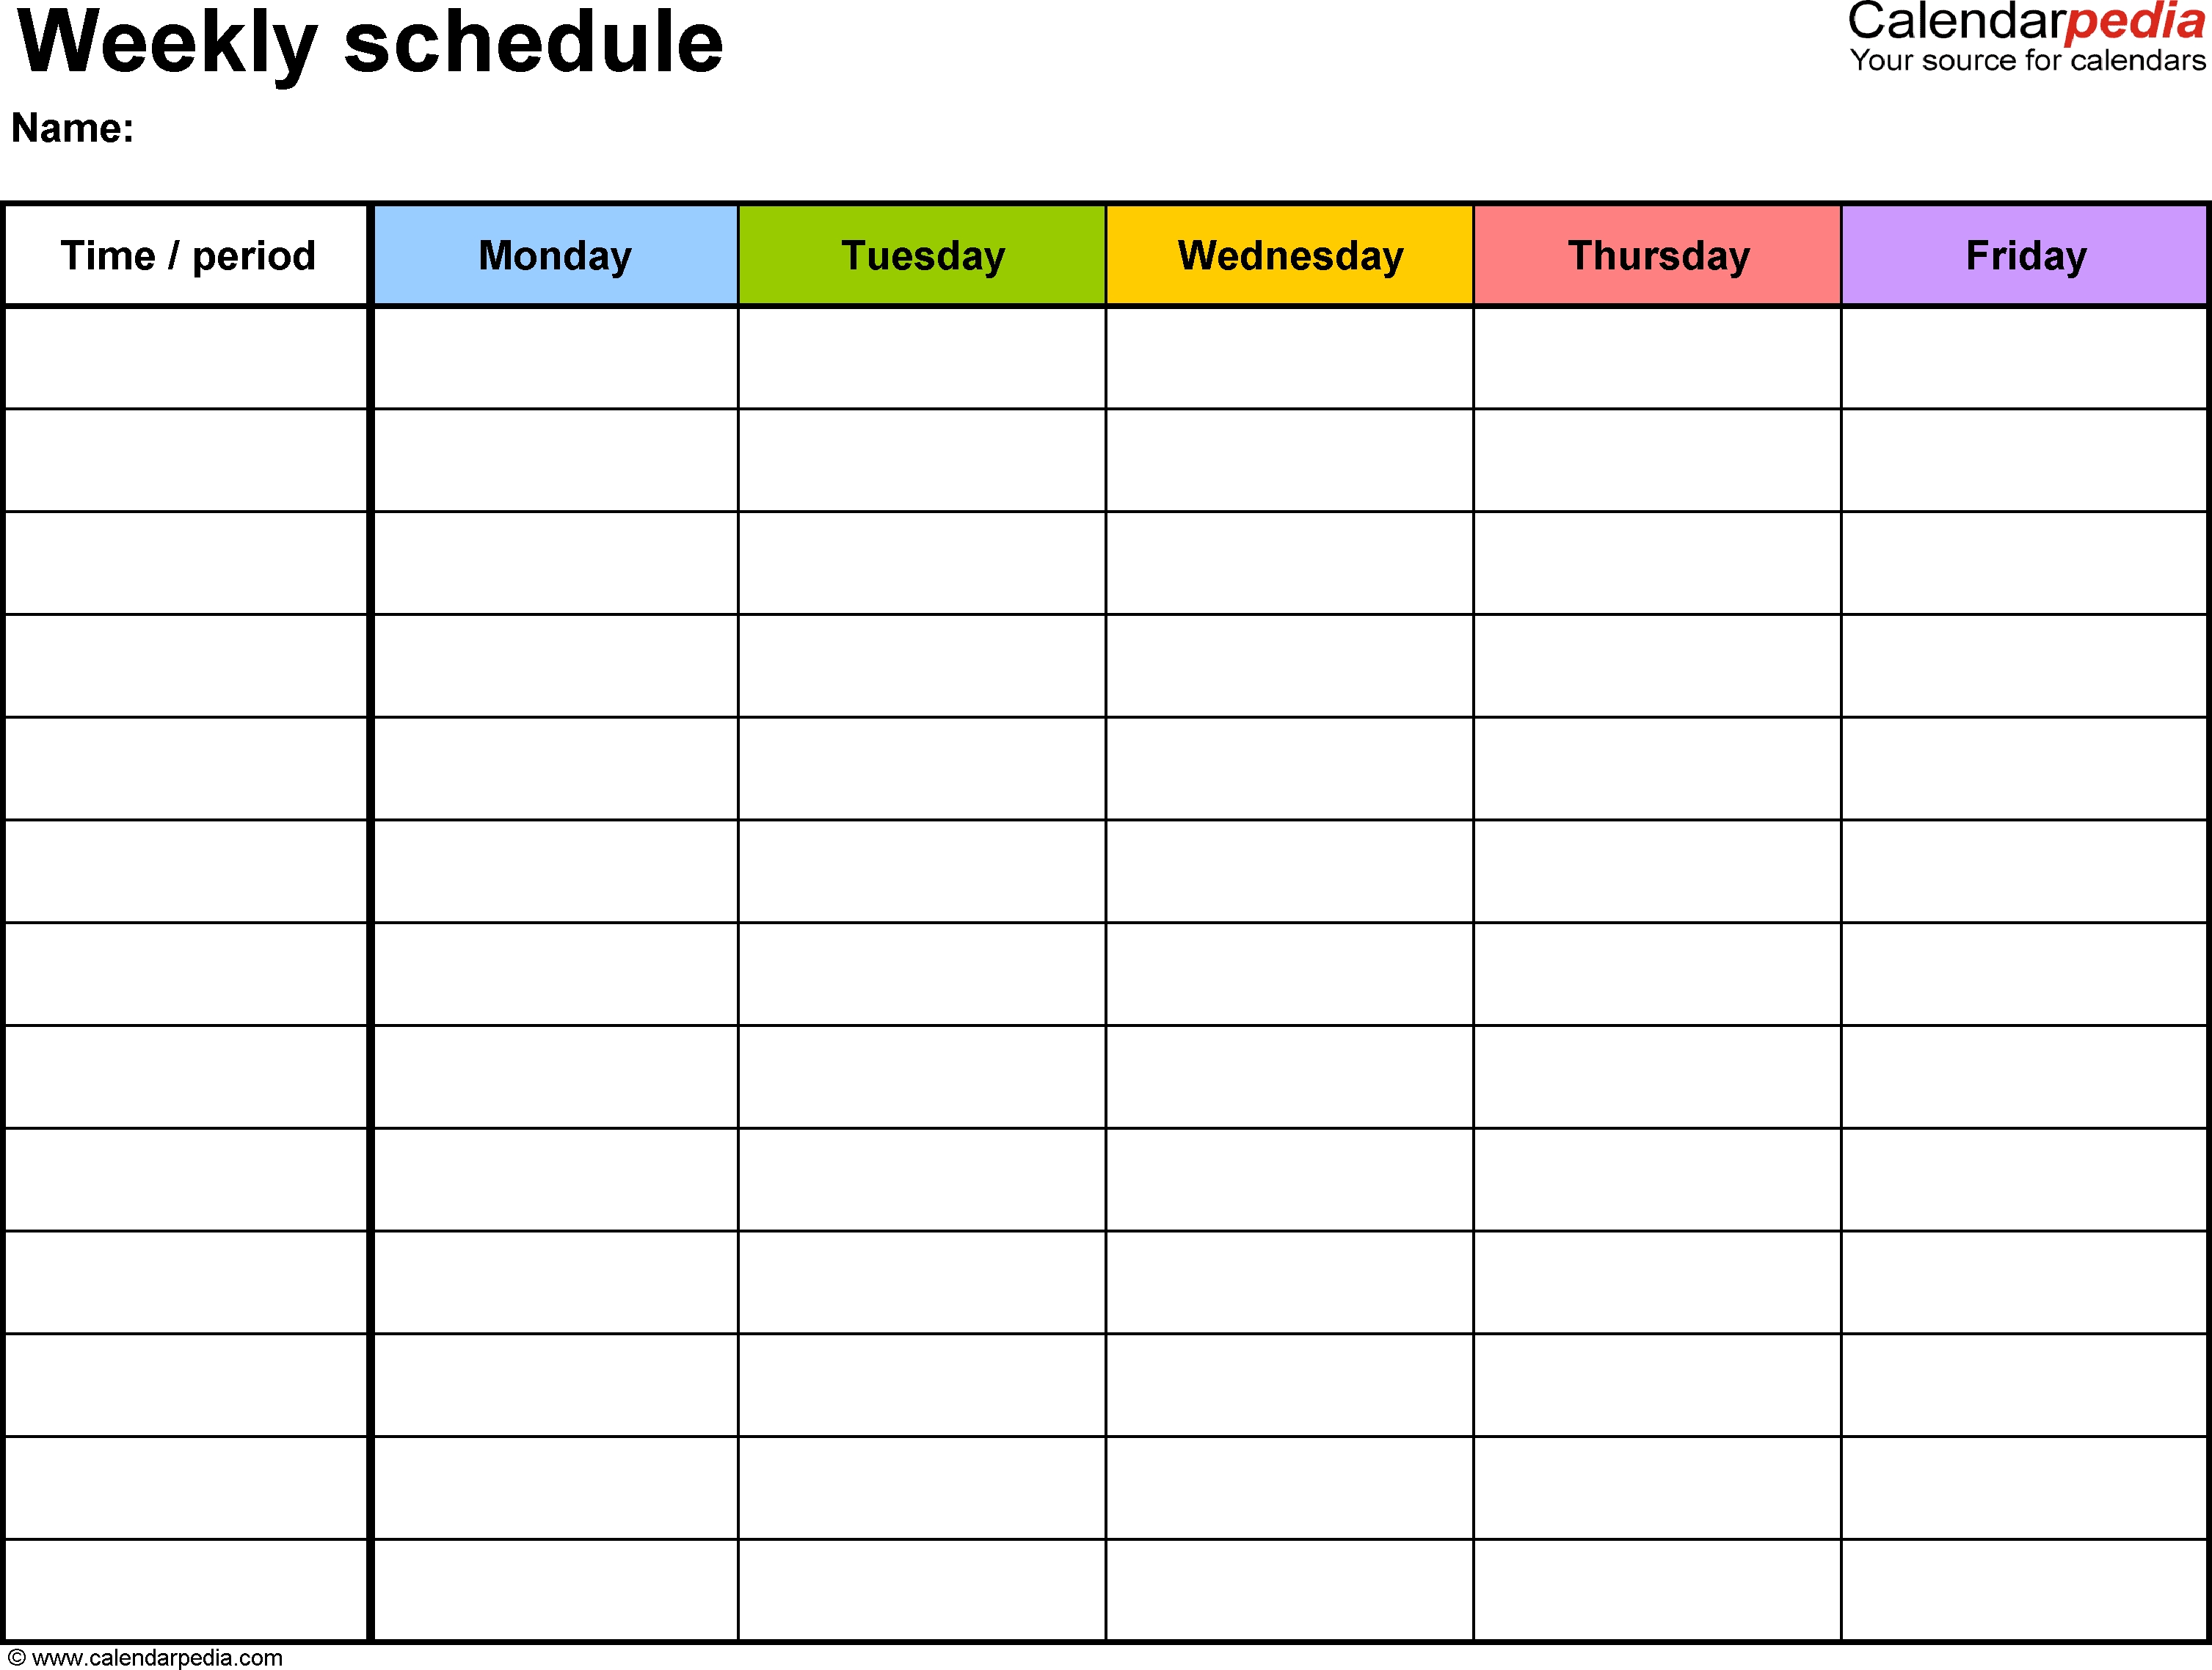 Weekly Schedule Template For Word Version 1: Landscape, 1 Free Calendar Schedule Template